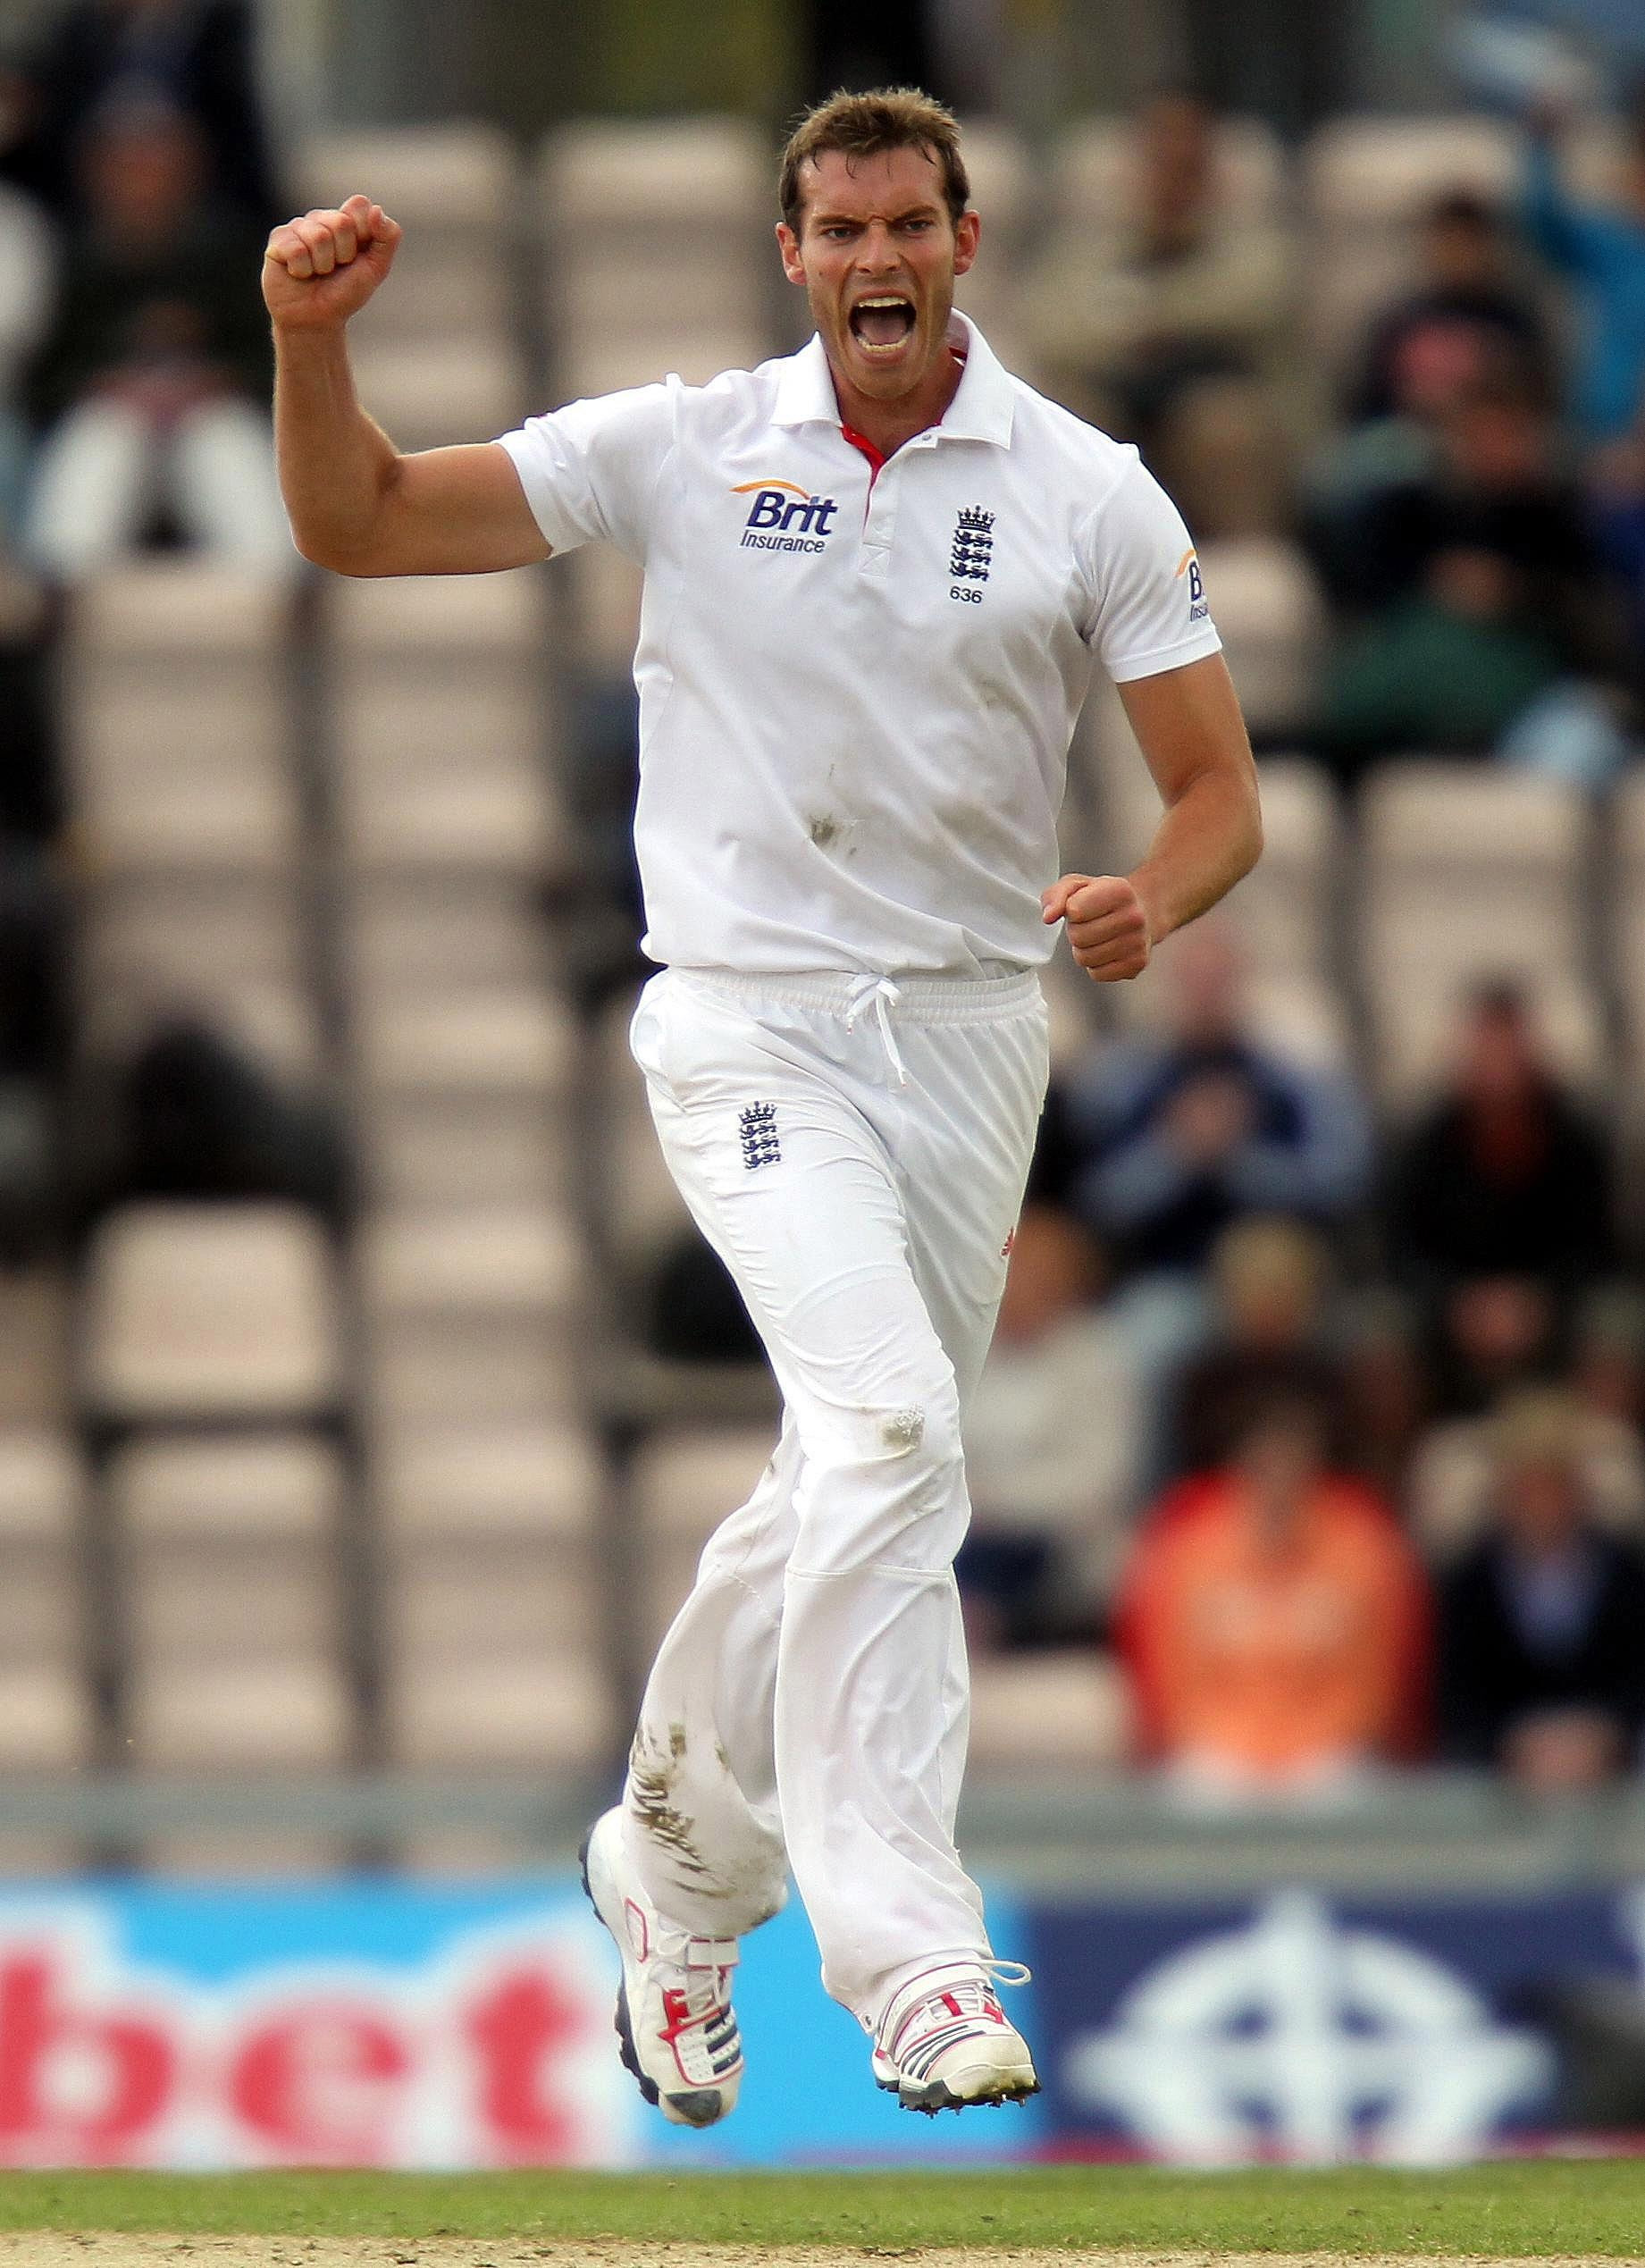 Tremlett retired in 2015 following a 15-year career in cricket